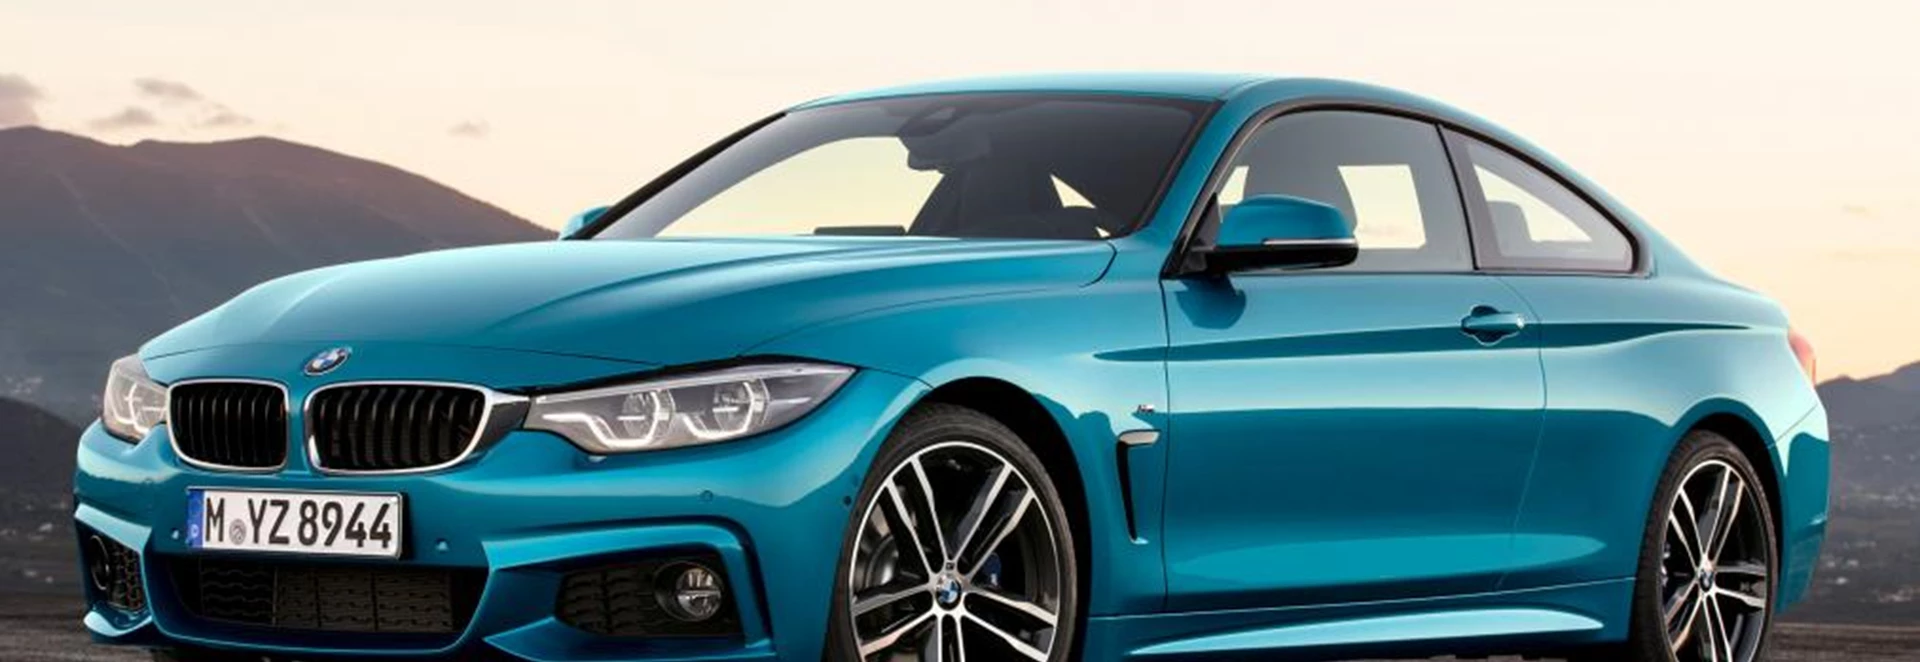 BMW 4 Series facelifted for 2017